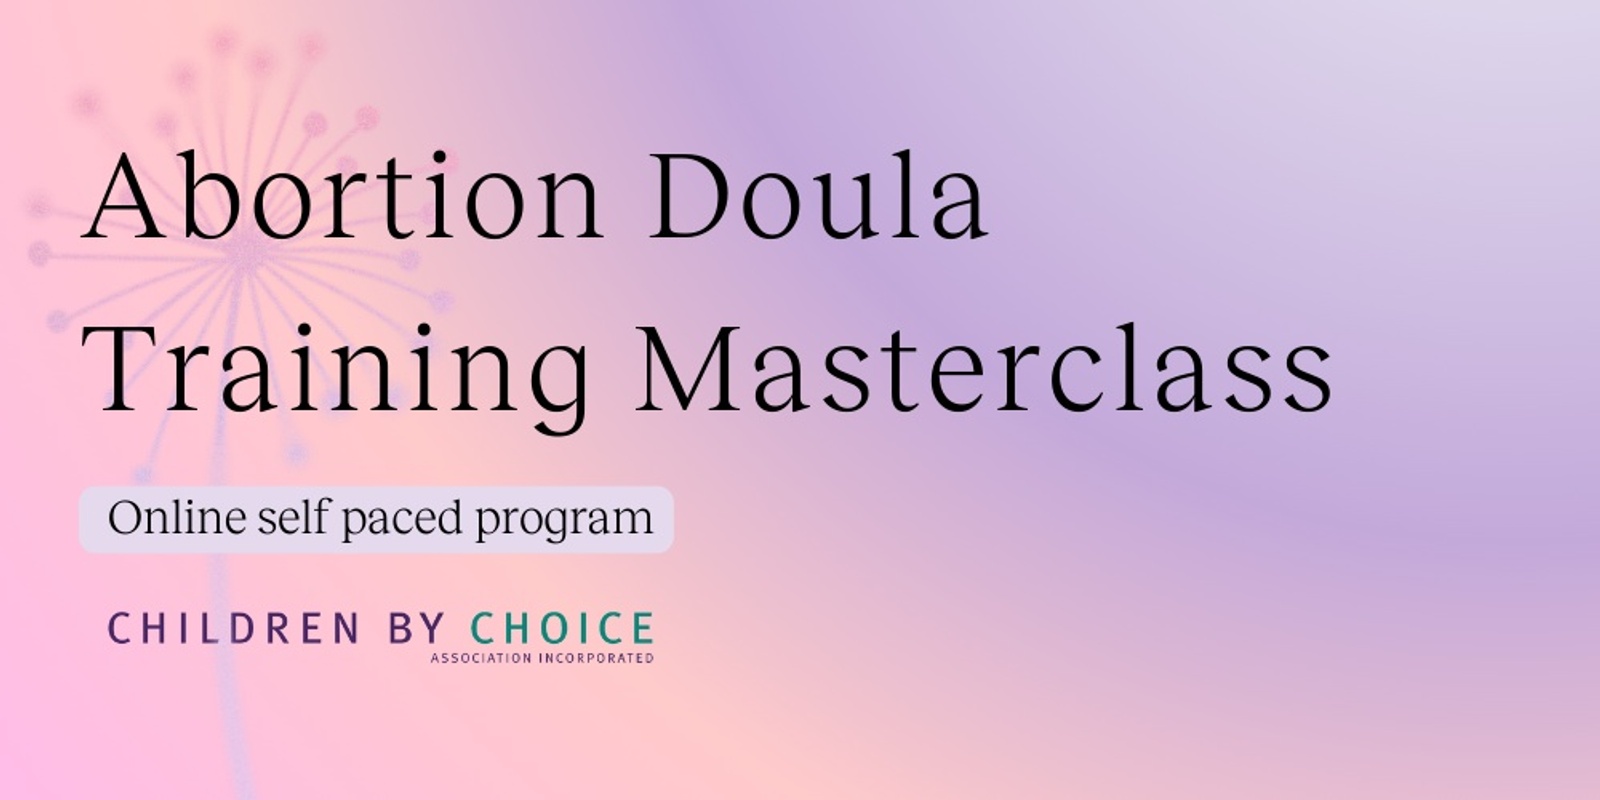 Abortion Doula Masterclass - Online Self-Paced Learning